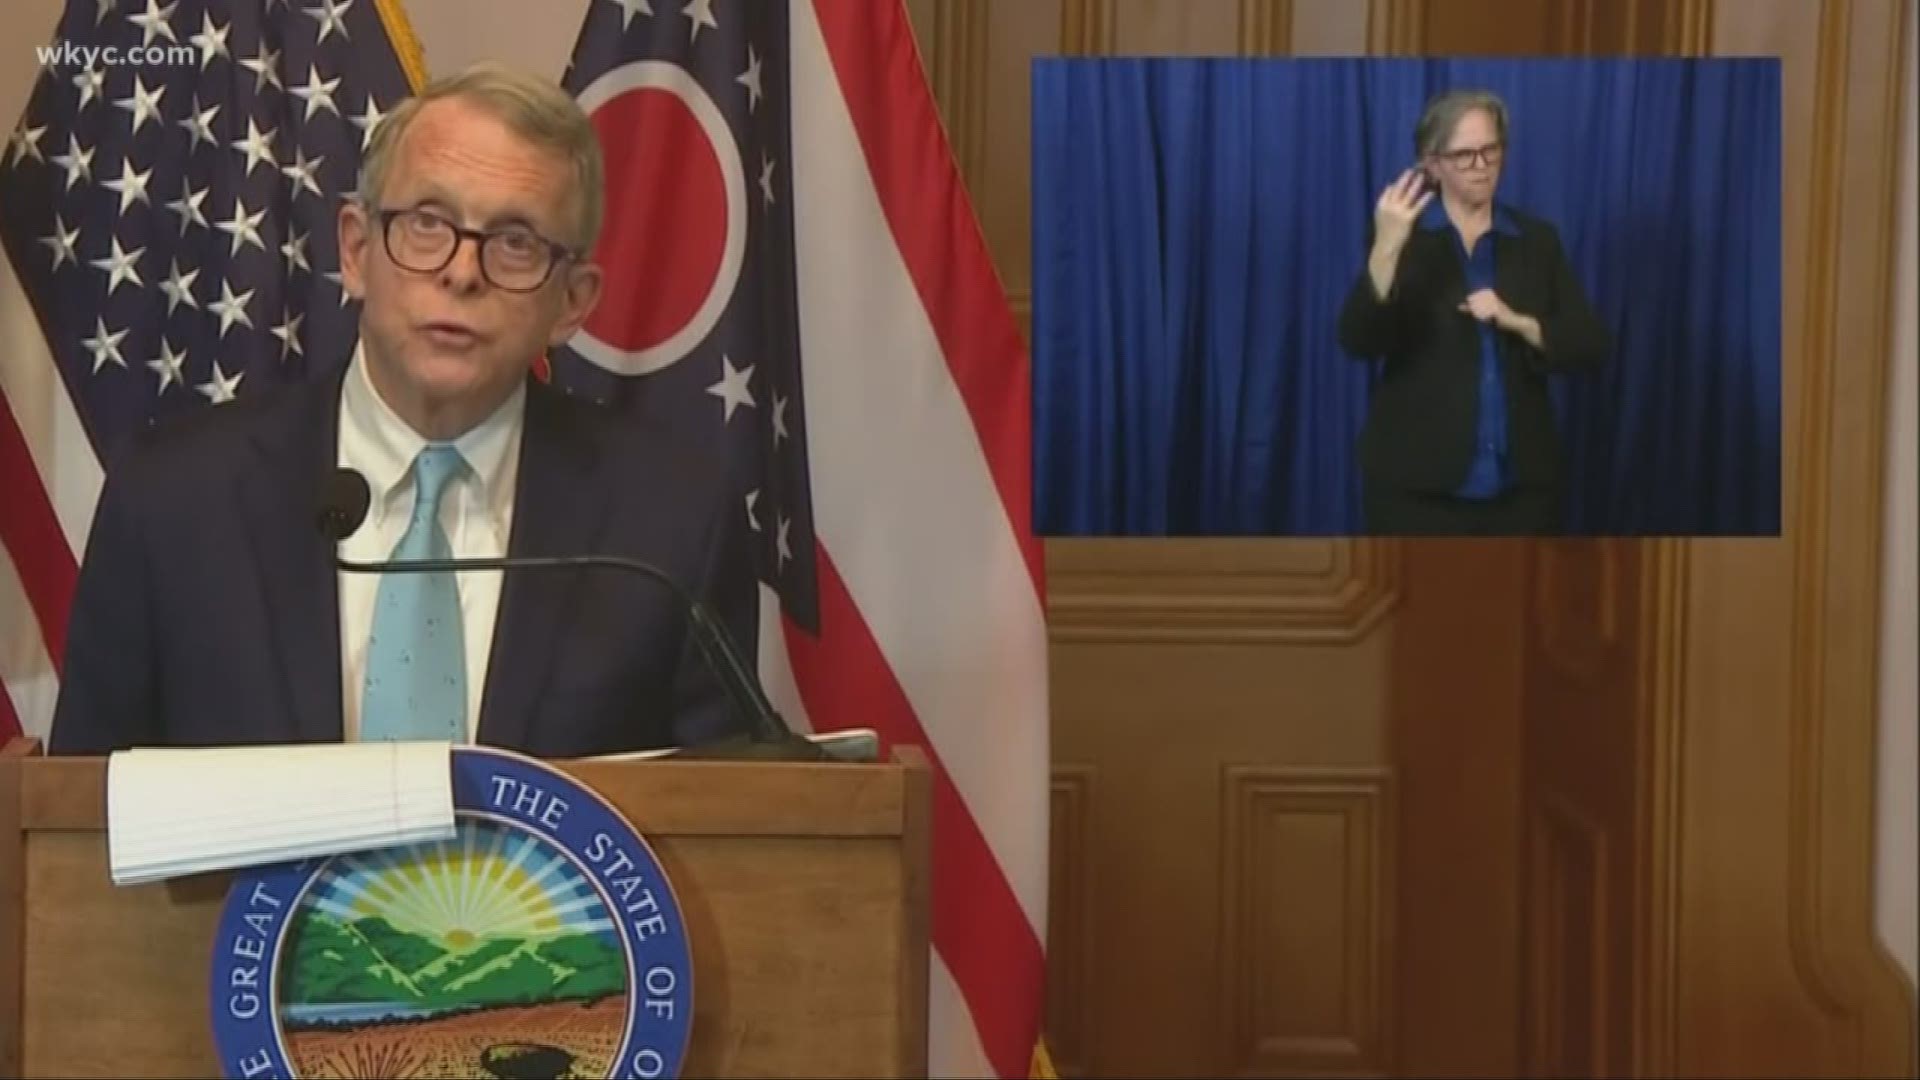 Ohio schools will be closed for another month. 
That's just one big take-away from Governor Dewine's press conference today. Laura Caso has the breakdown.